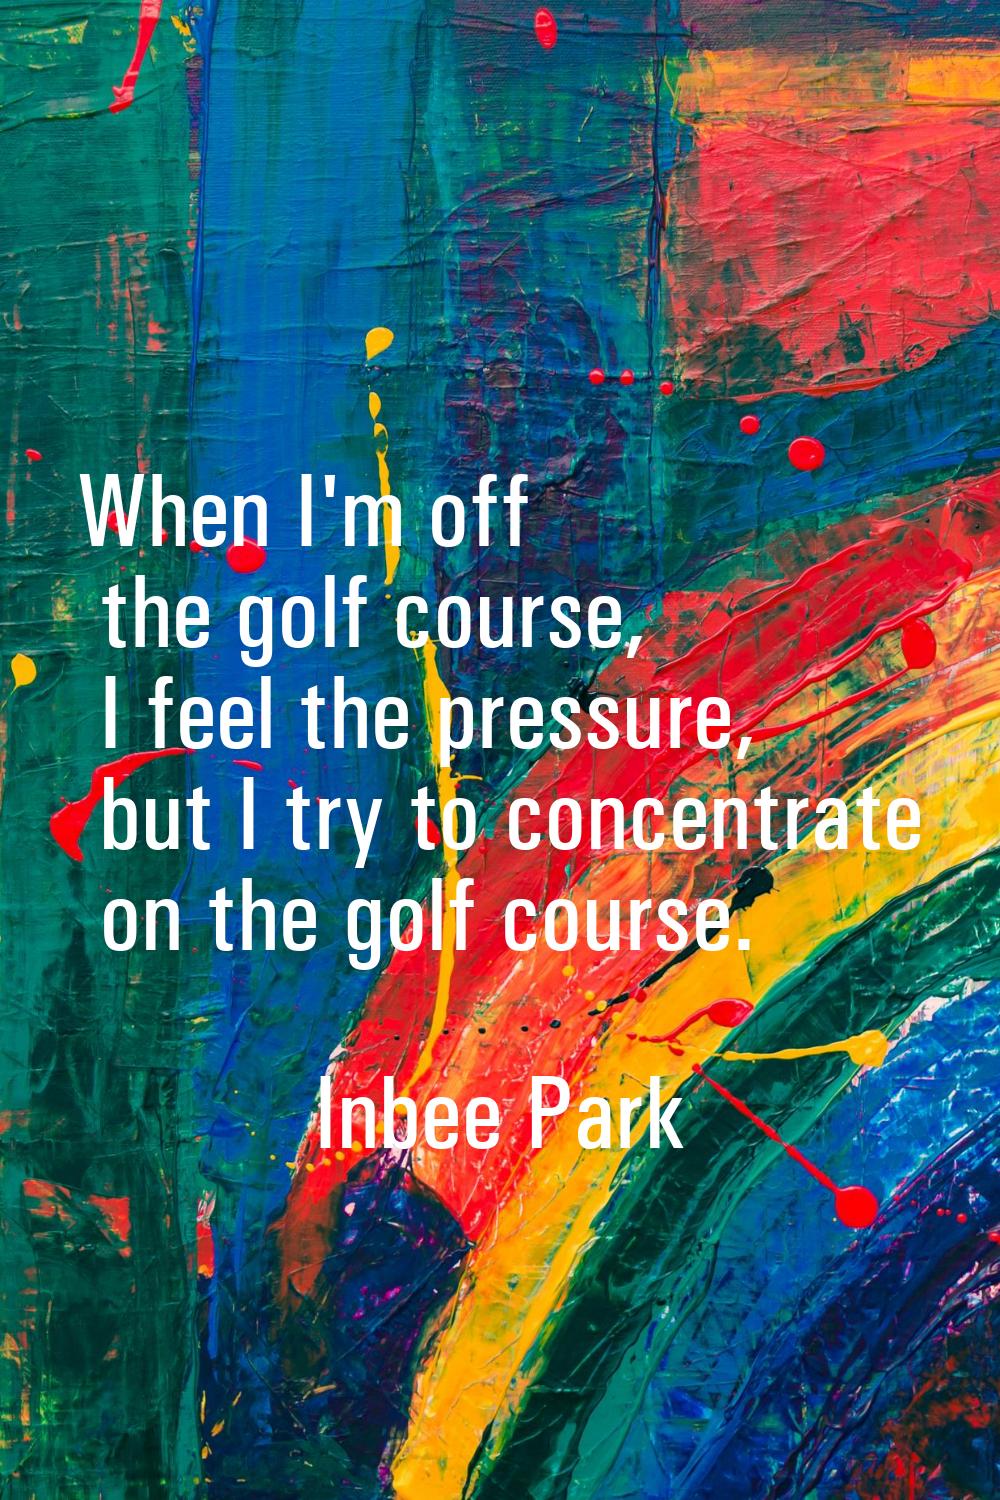 When I'm off the golf course, I feel the pressure, but I try to concentrate on the golf course.